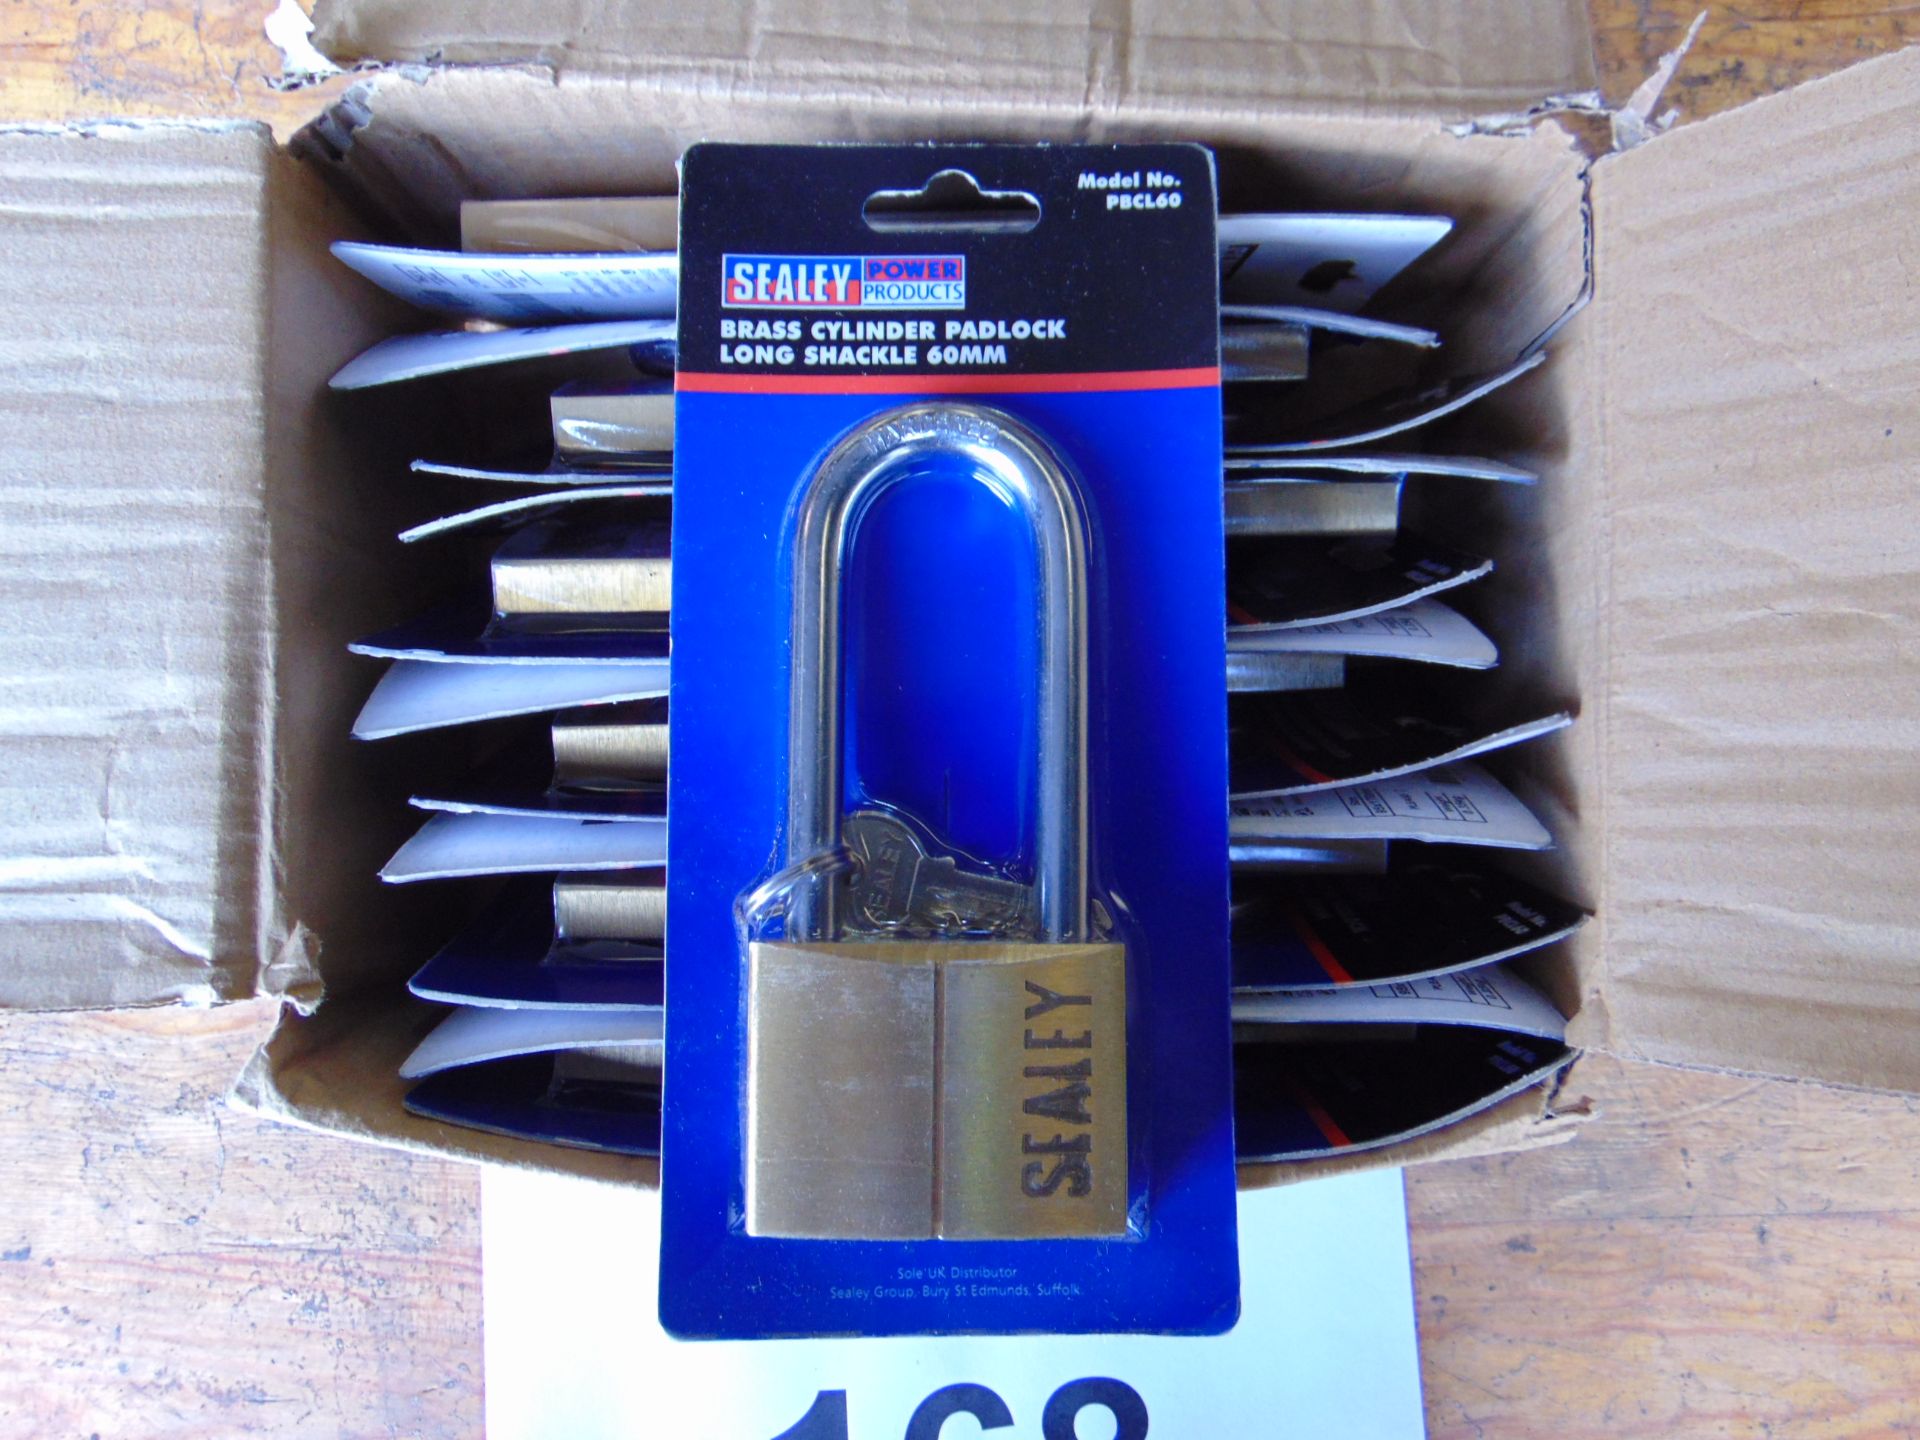 12 x New Sealey Padlock w/ Brass Cylinder - Long Shackle 60mm - in Original Packaging - Image 2 of 3